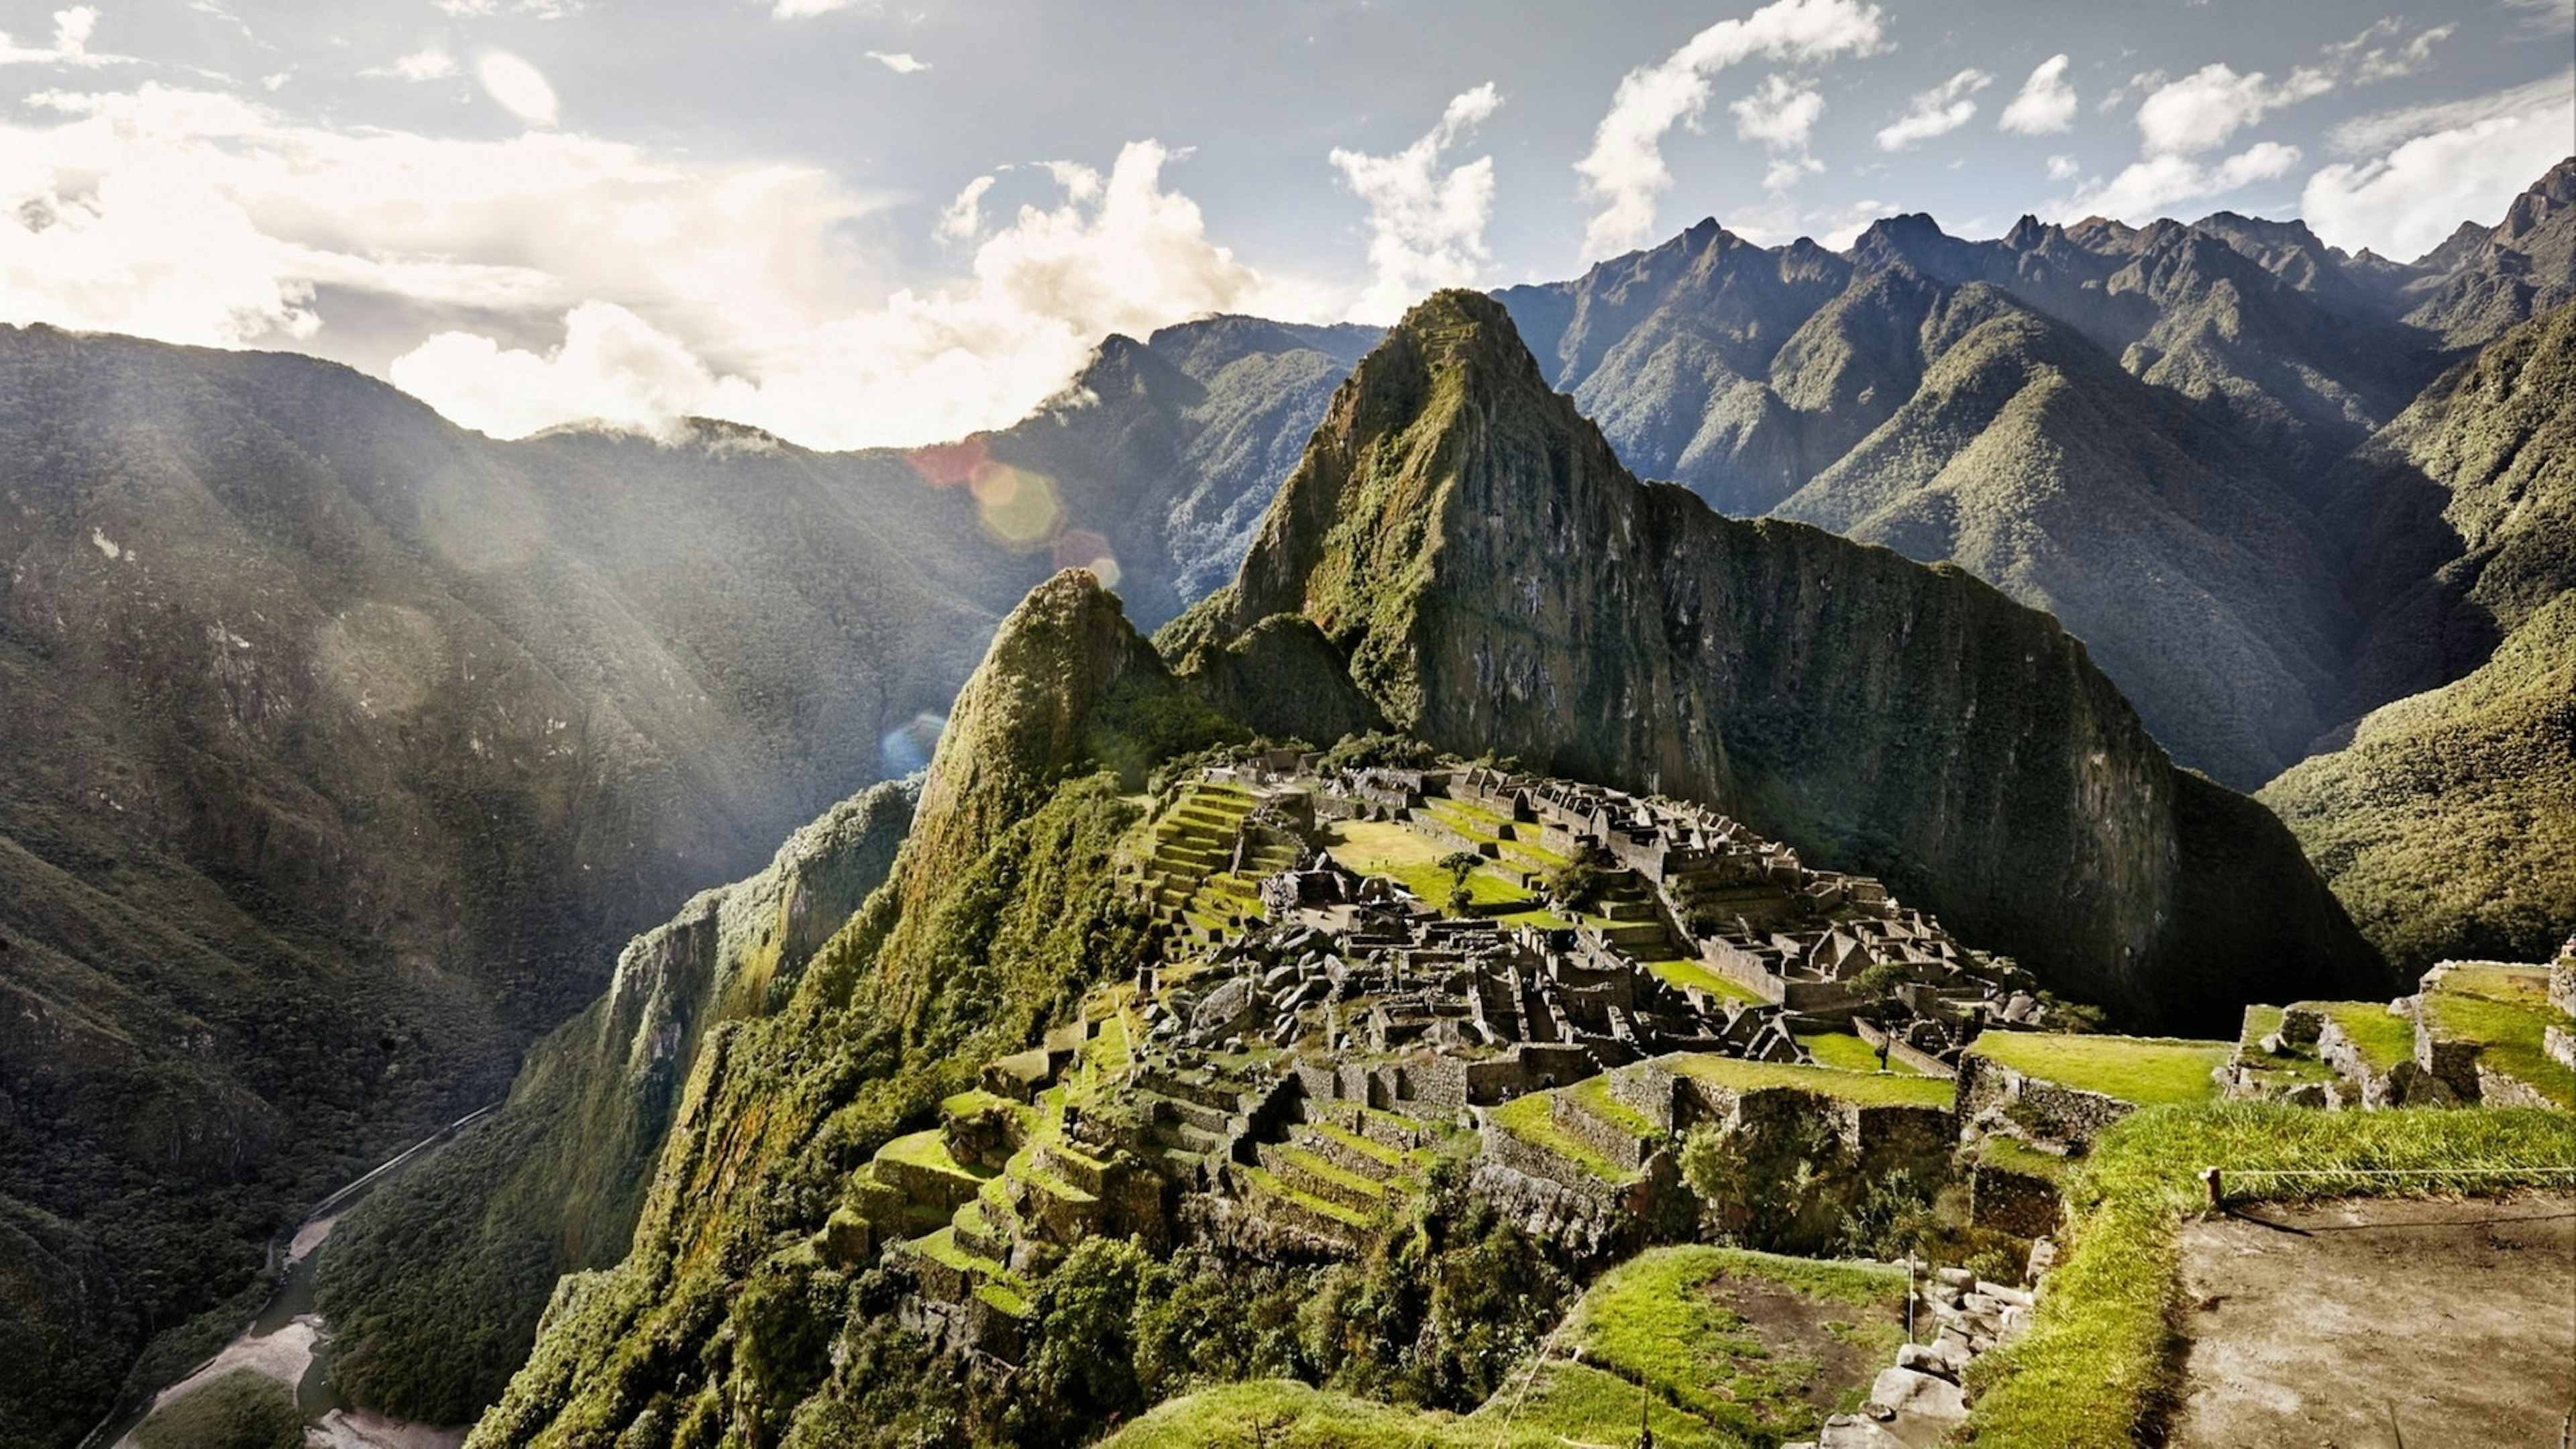 View of the ancient Inca City of Machu Picchu